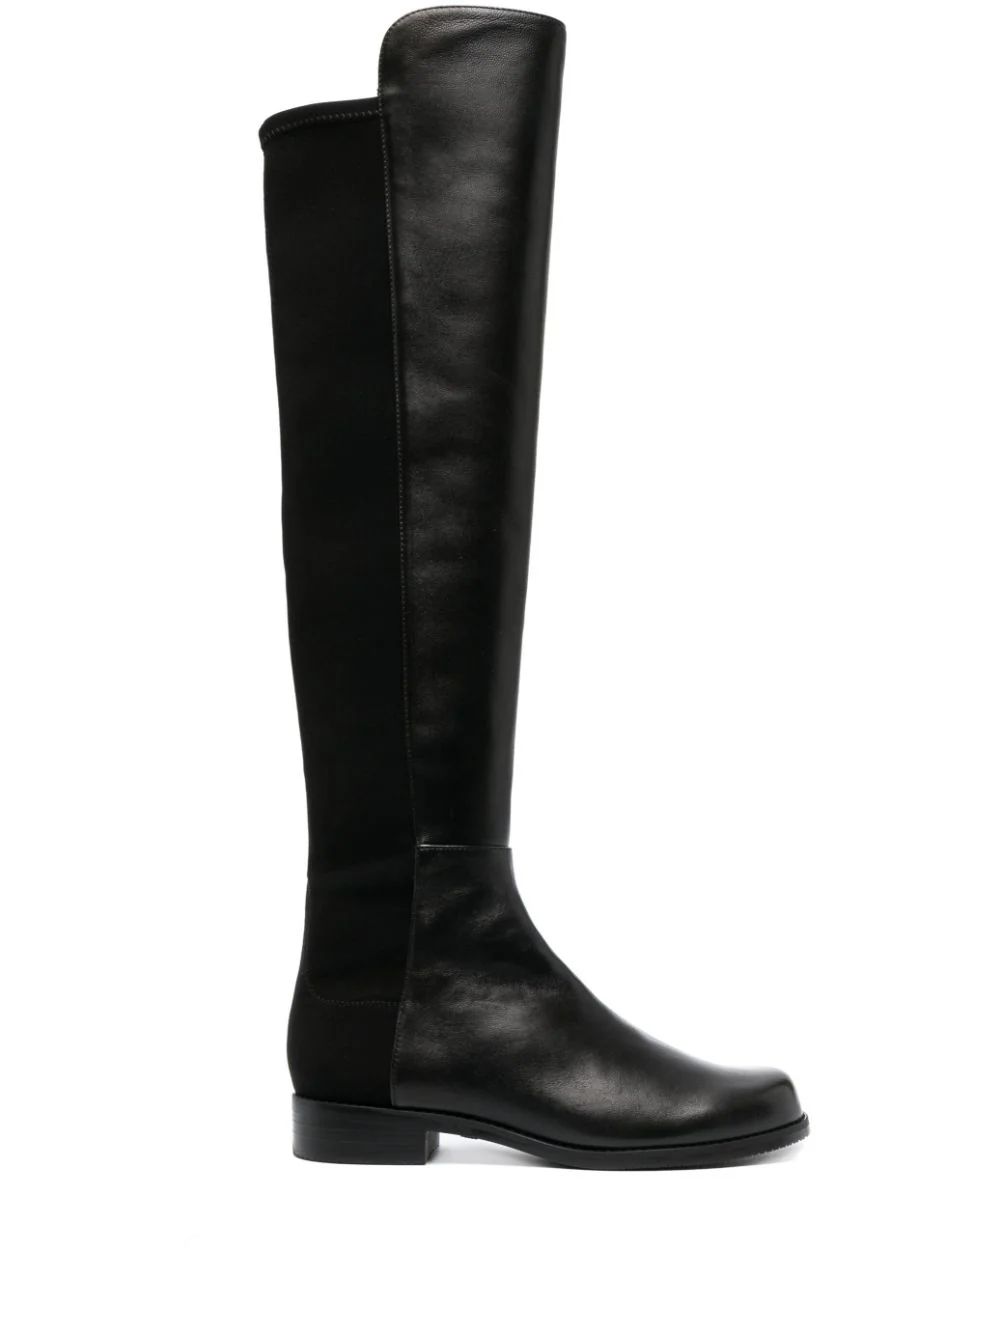 5050 leather boots | Farfetch Global